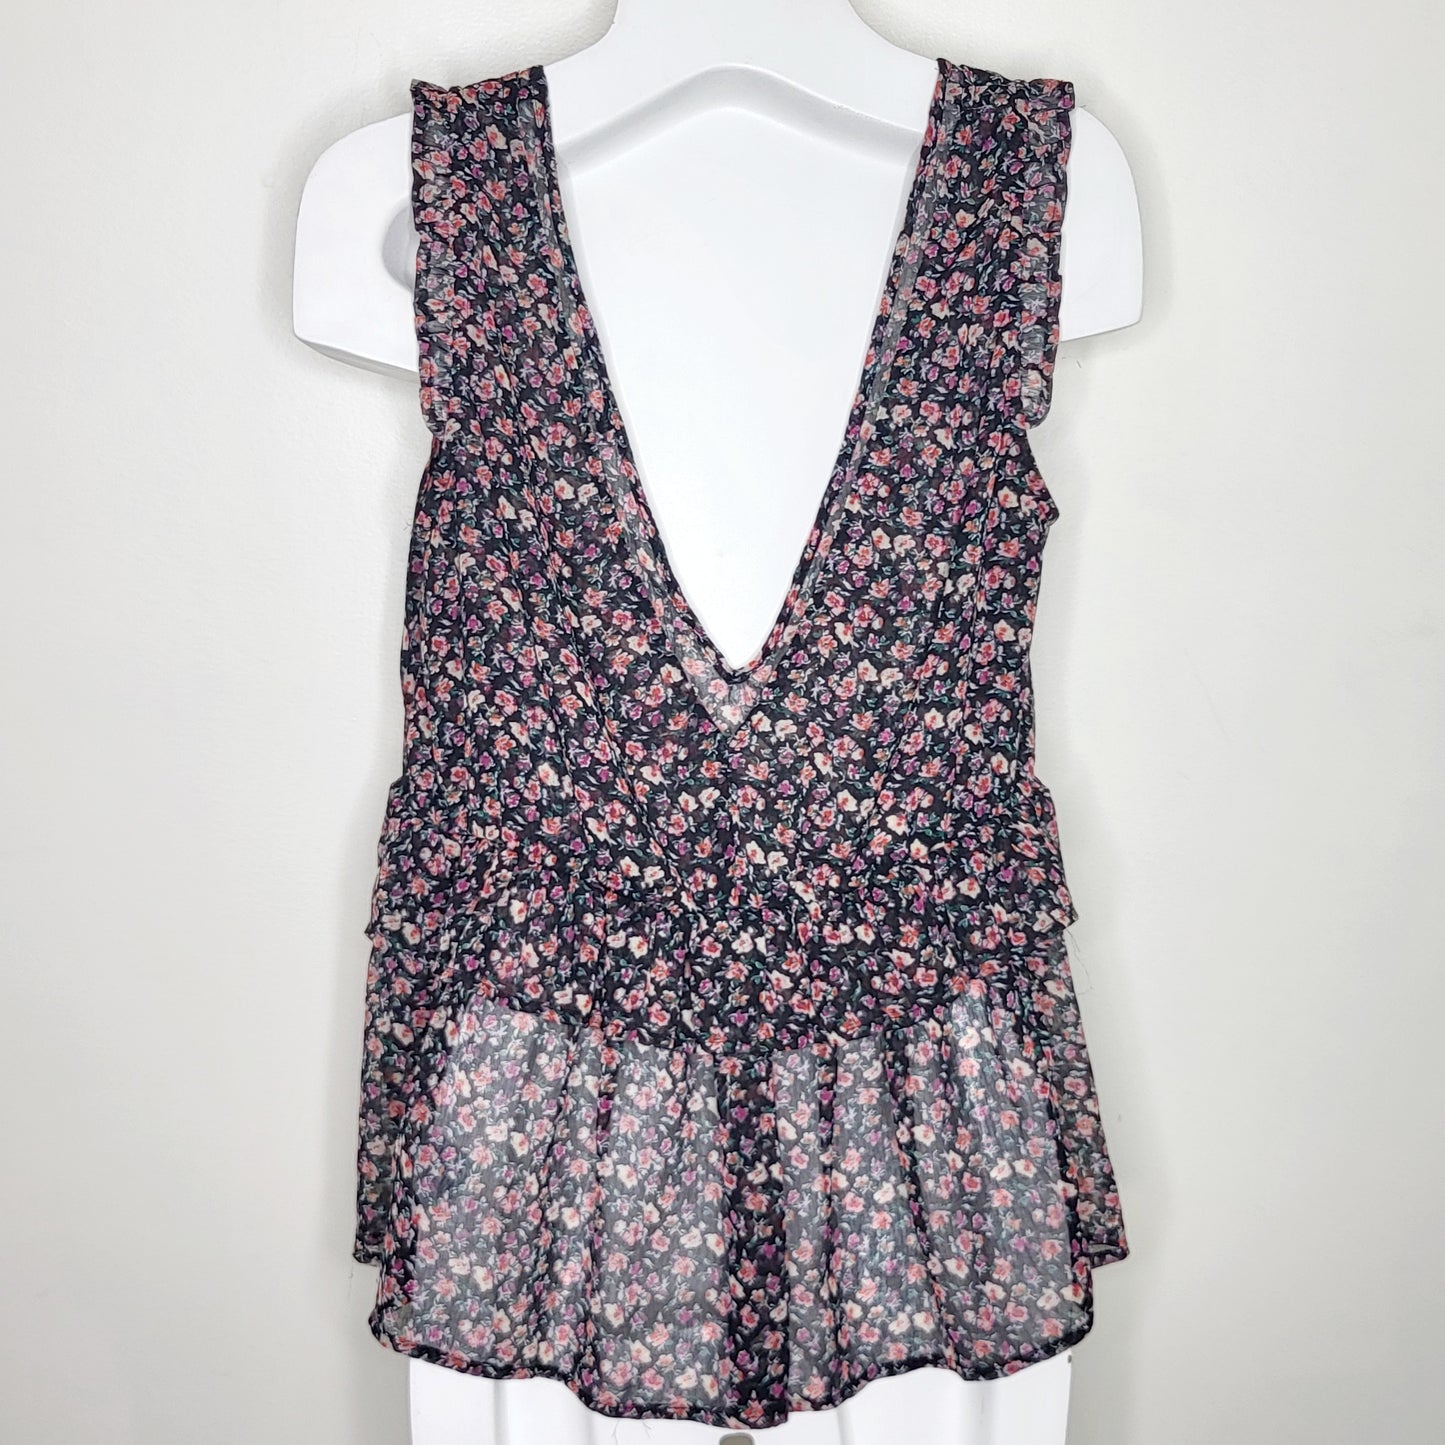 CHND2 - American Eagle Outifitters floral print sleeveless blouse, size medium, good condition